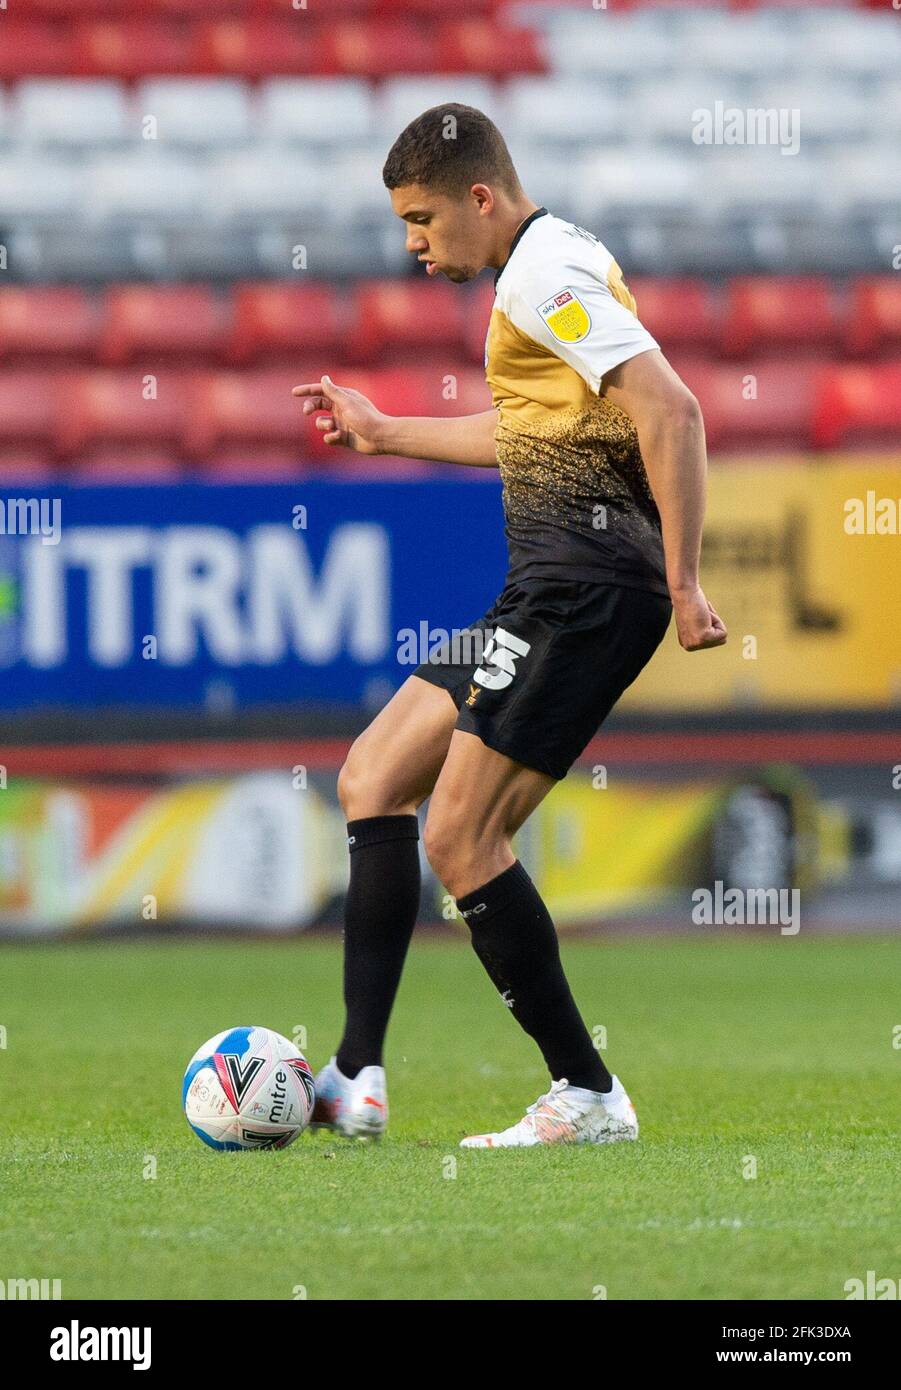 London, UK. 27th Apr, 2021. Nathan Wood of Crewe Alexandra during the Sky Bet League 1 behind closed doors match between Charlton Athletic and Crewe Alexandra at The Valley, London, England on 27 April 2021. Photo by Alan Stanford/PRiME Media Images. Credit: PRiME Media Images/Alamy Live News Stock Photo